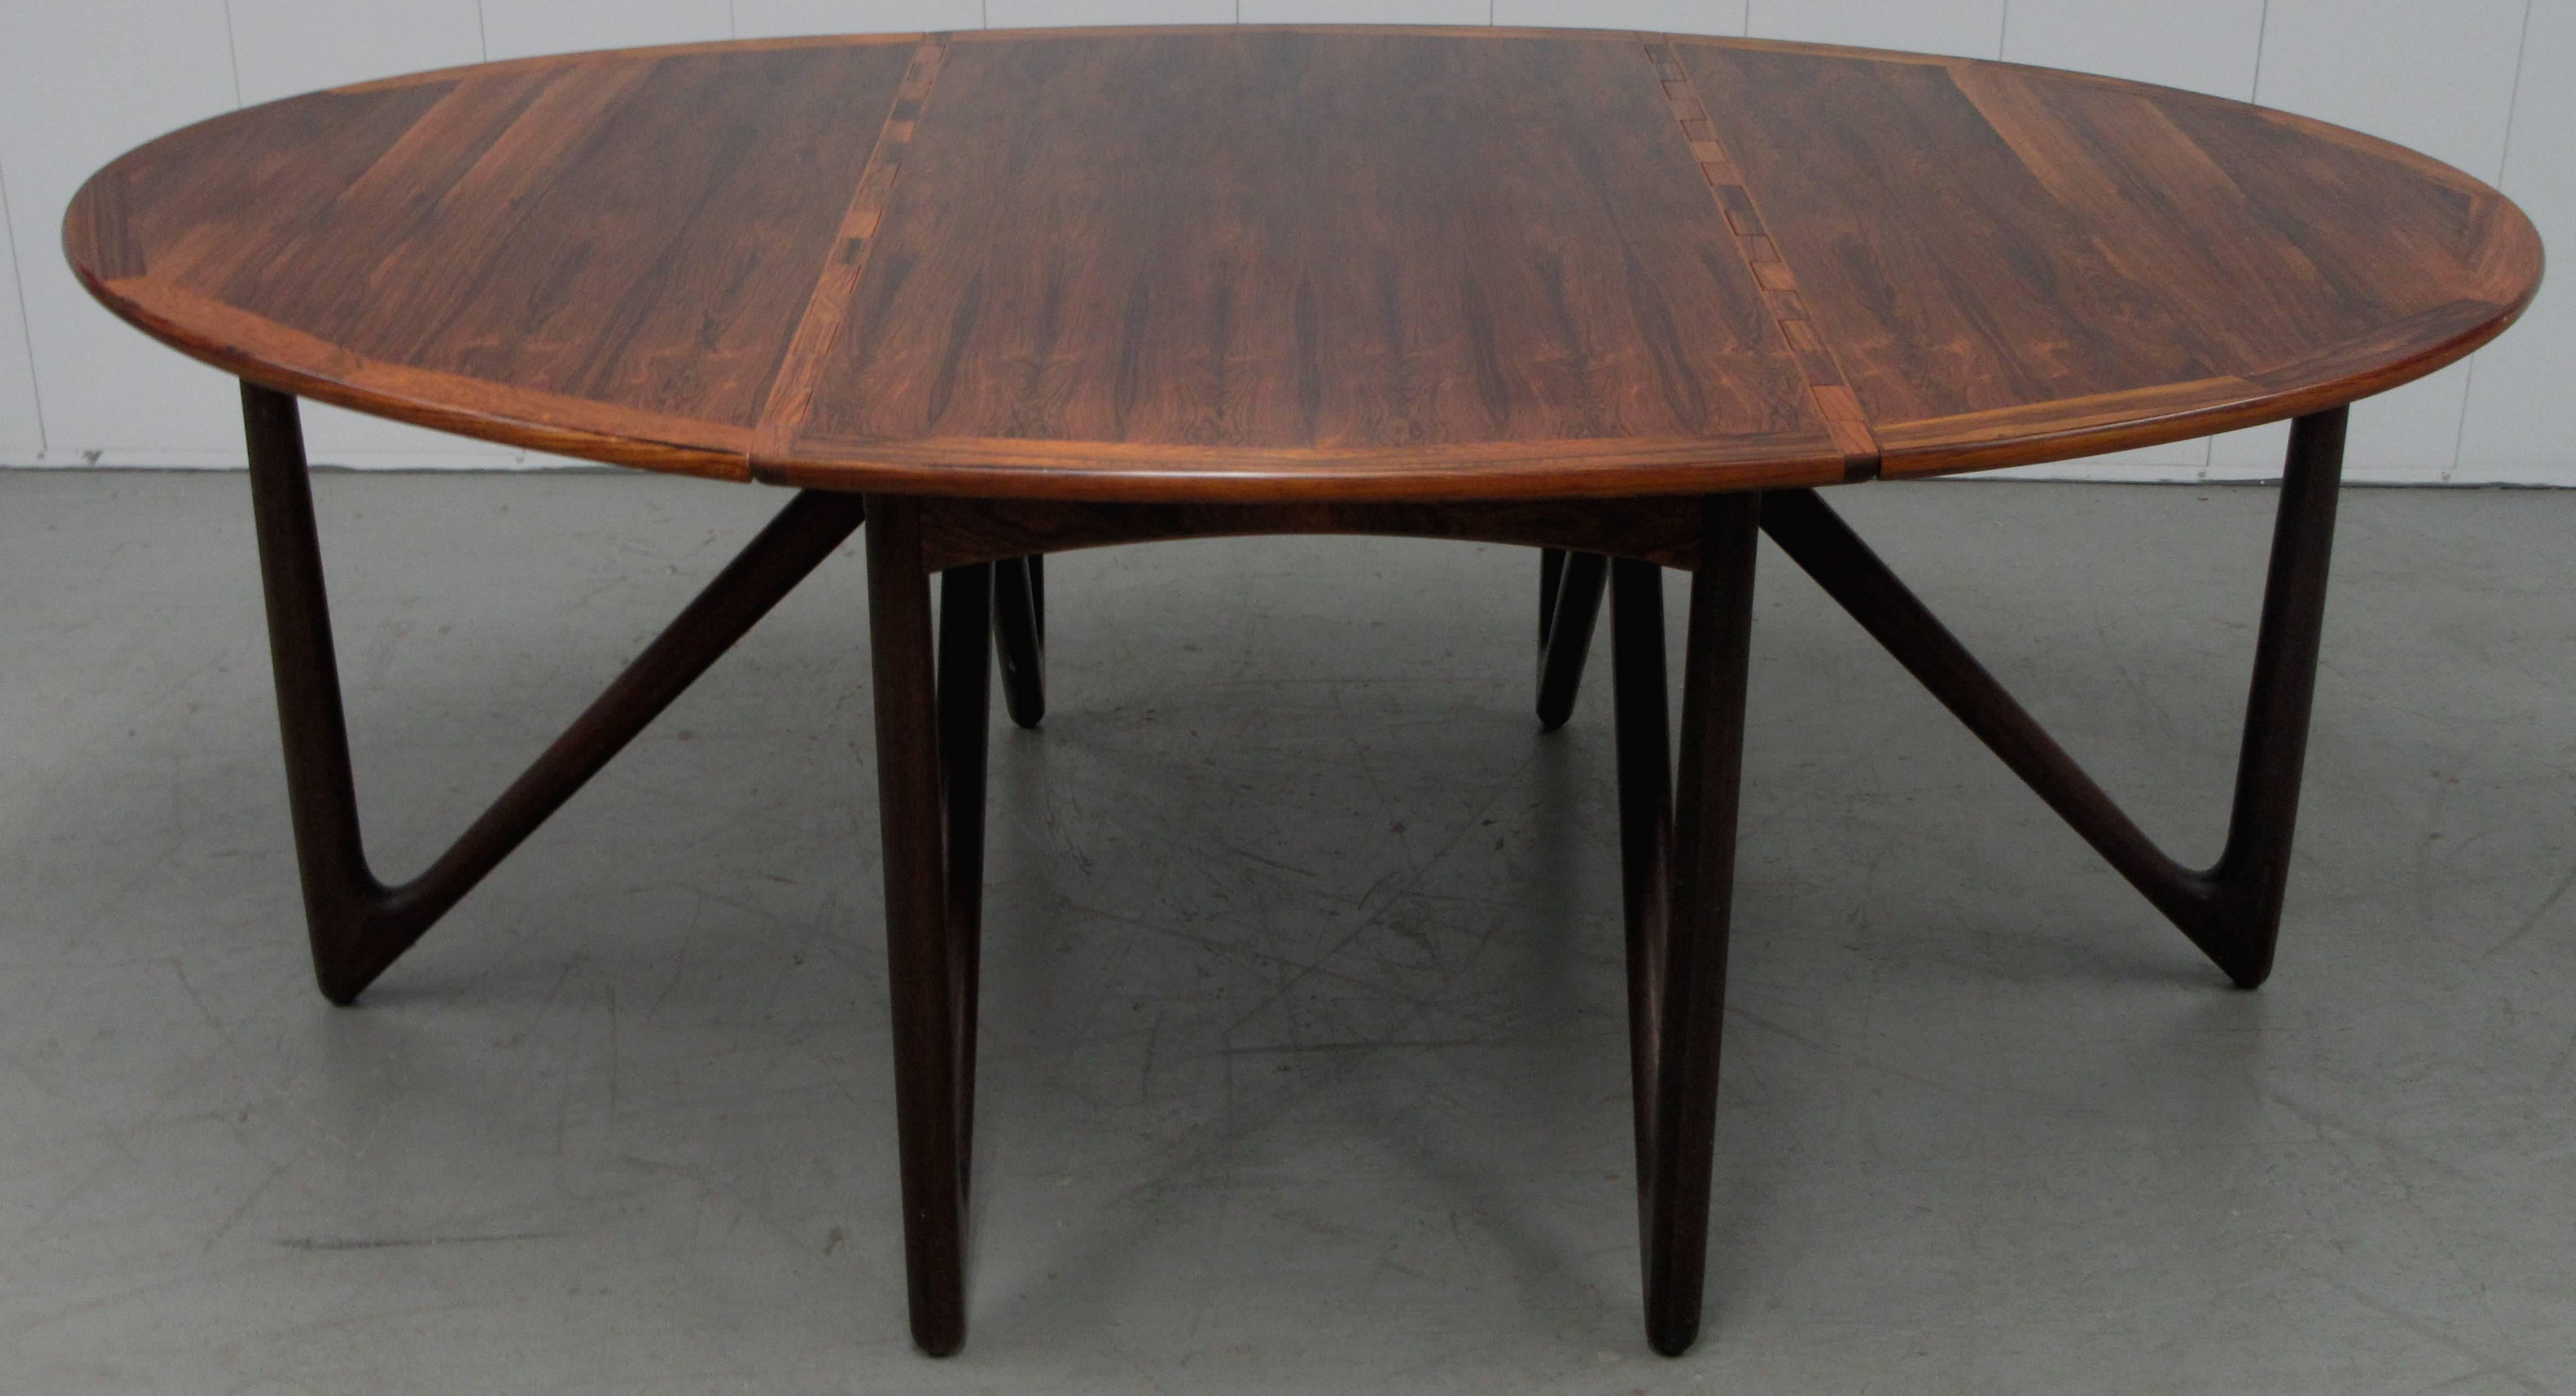 A solid rosewood Danish Modern gateleg dining table. When extended the dining table is oval. The ends drop down on knuckle hinges to be used as a rectangular console. The table includes custom-made pads. (pictured)
The measurements when the leaves